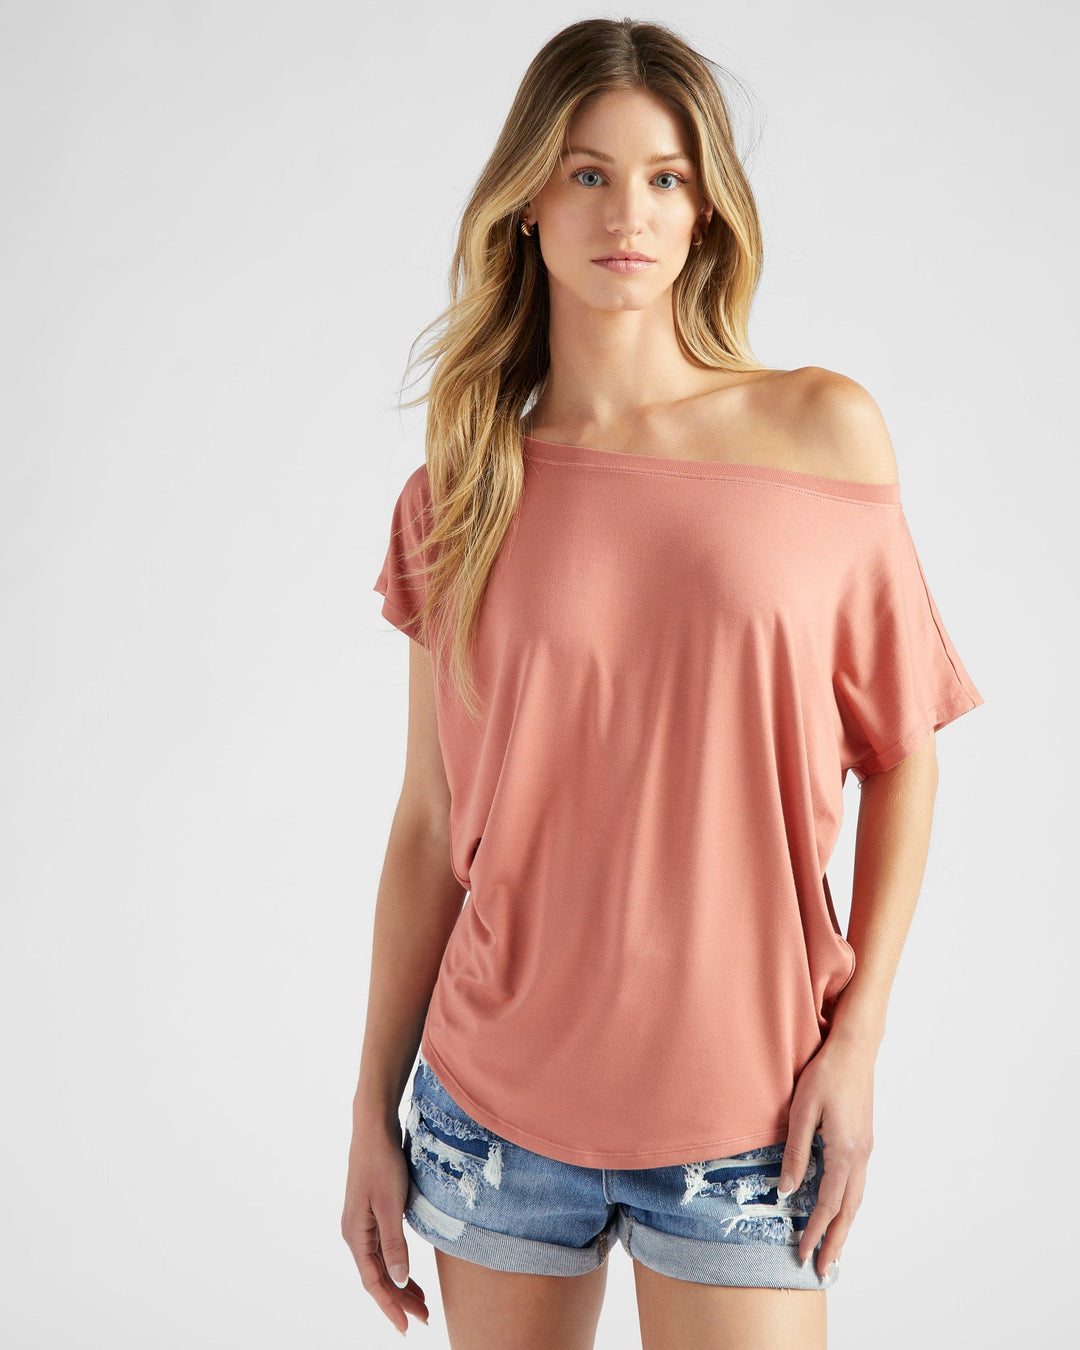 Peach Blossom $|& 78&SUNNY Edgewater Off The Shoulder Tee - SOF Front